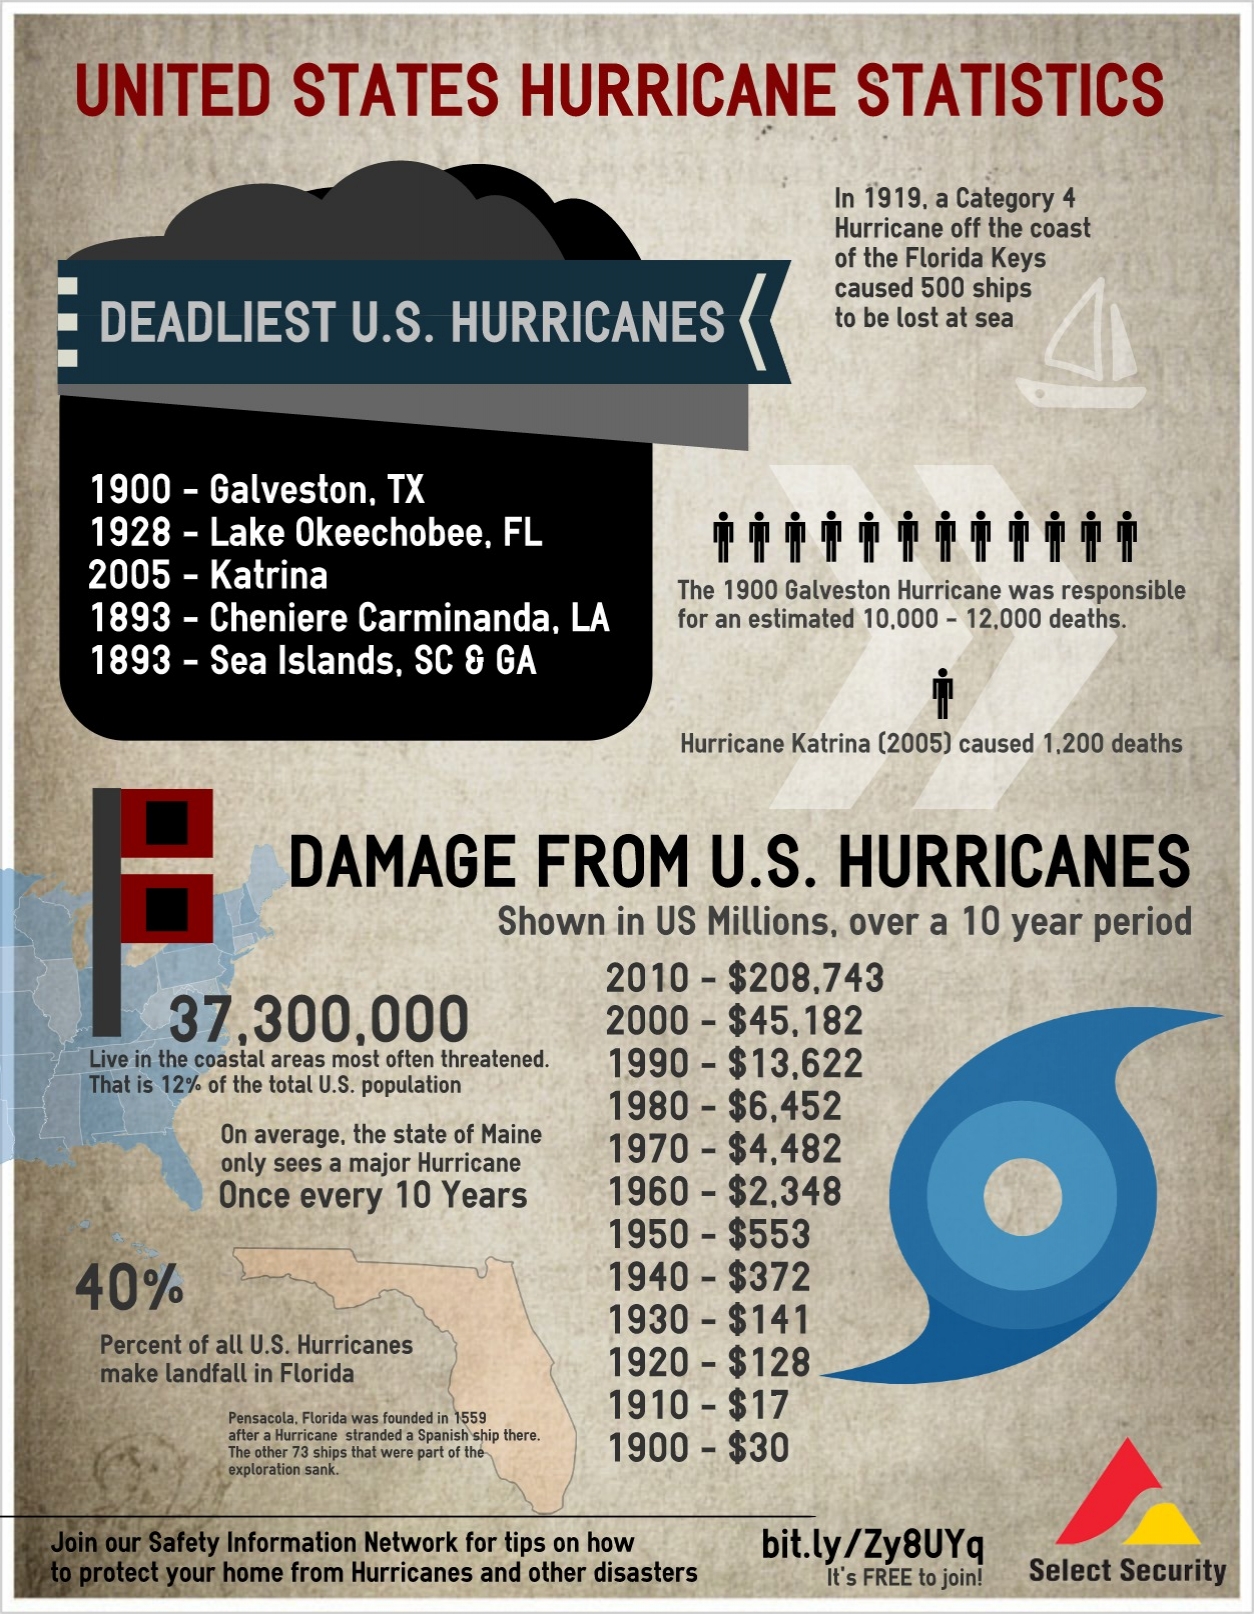 145524Hurricaneimage - Simple Infographic Maker Tool by Easelly